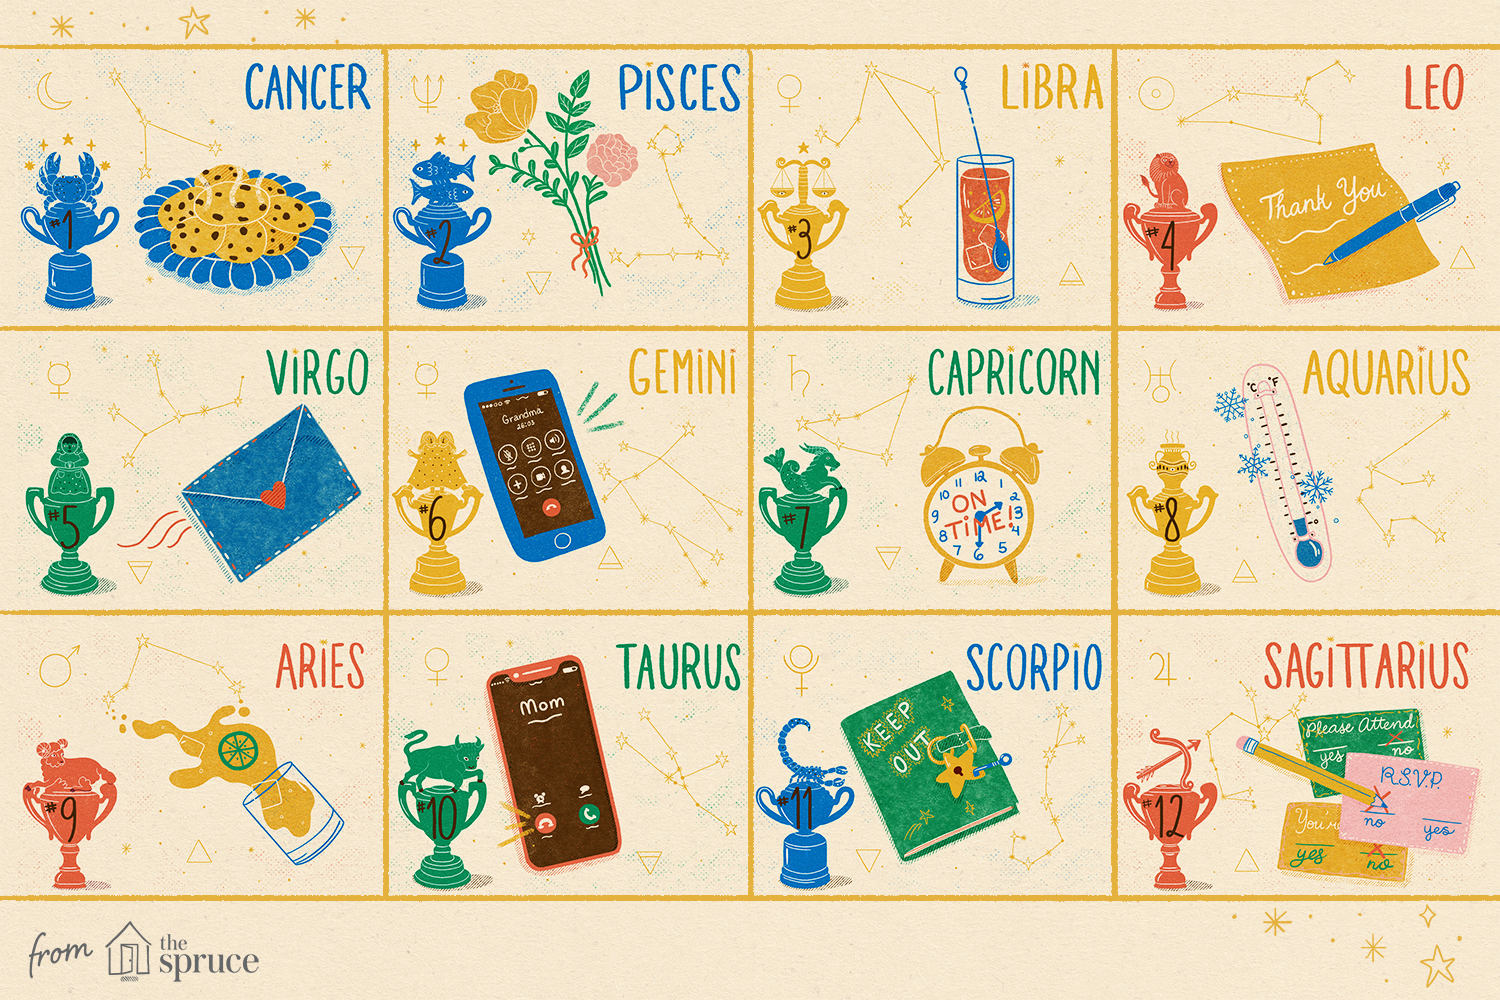 How Polite Are You, According to Your Zodiac Sign?